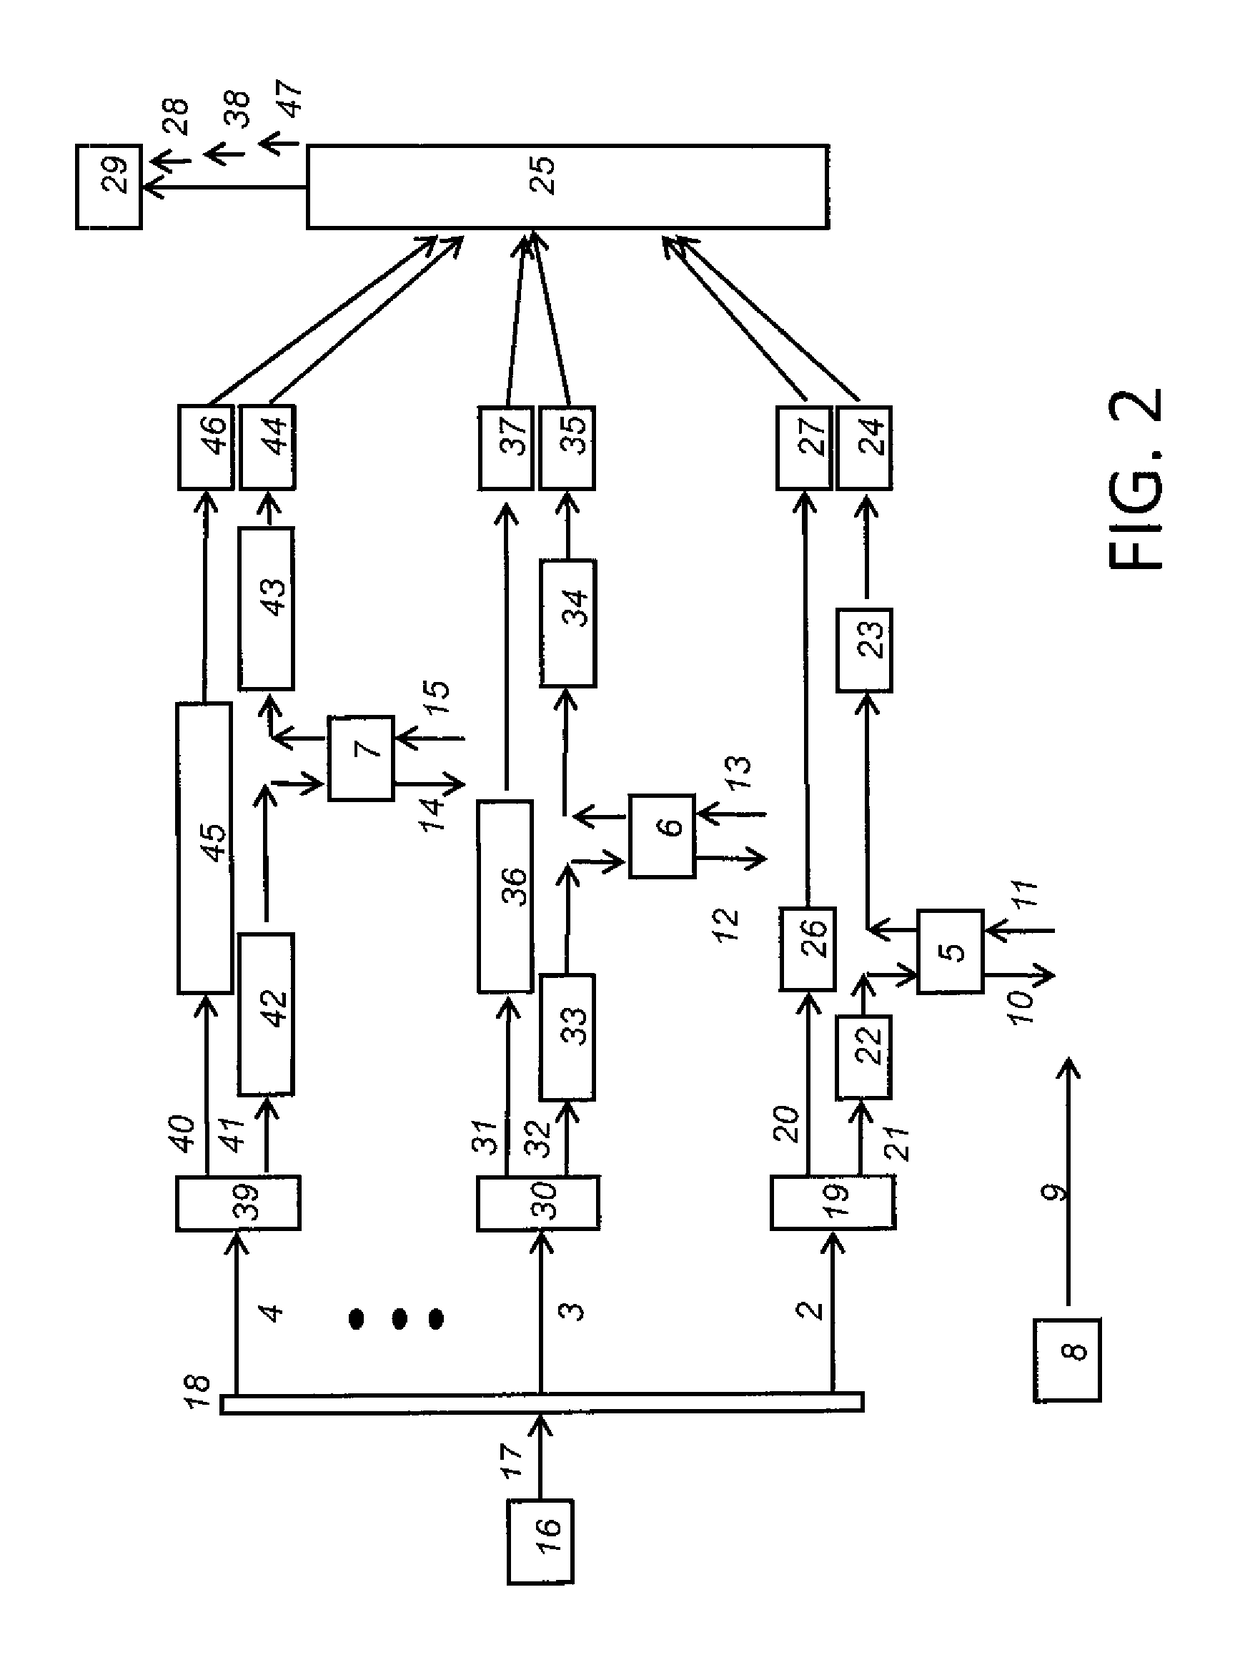 Apparatus and method for improving detection precision in laser vibrometric studies